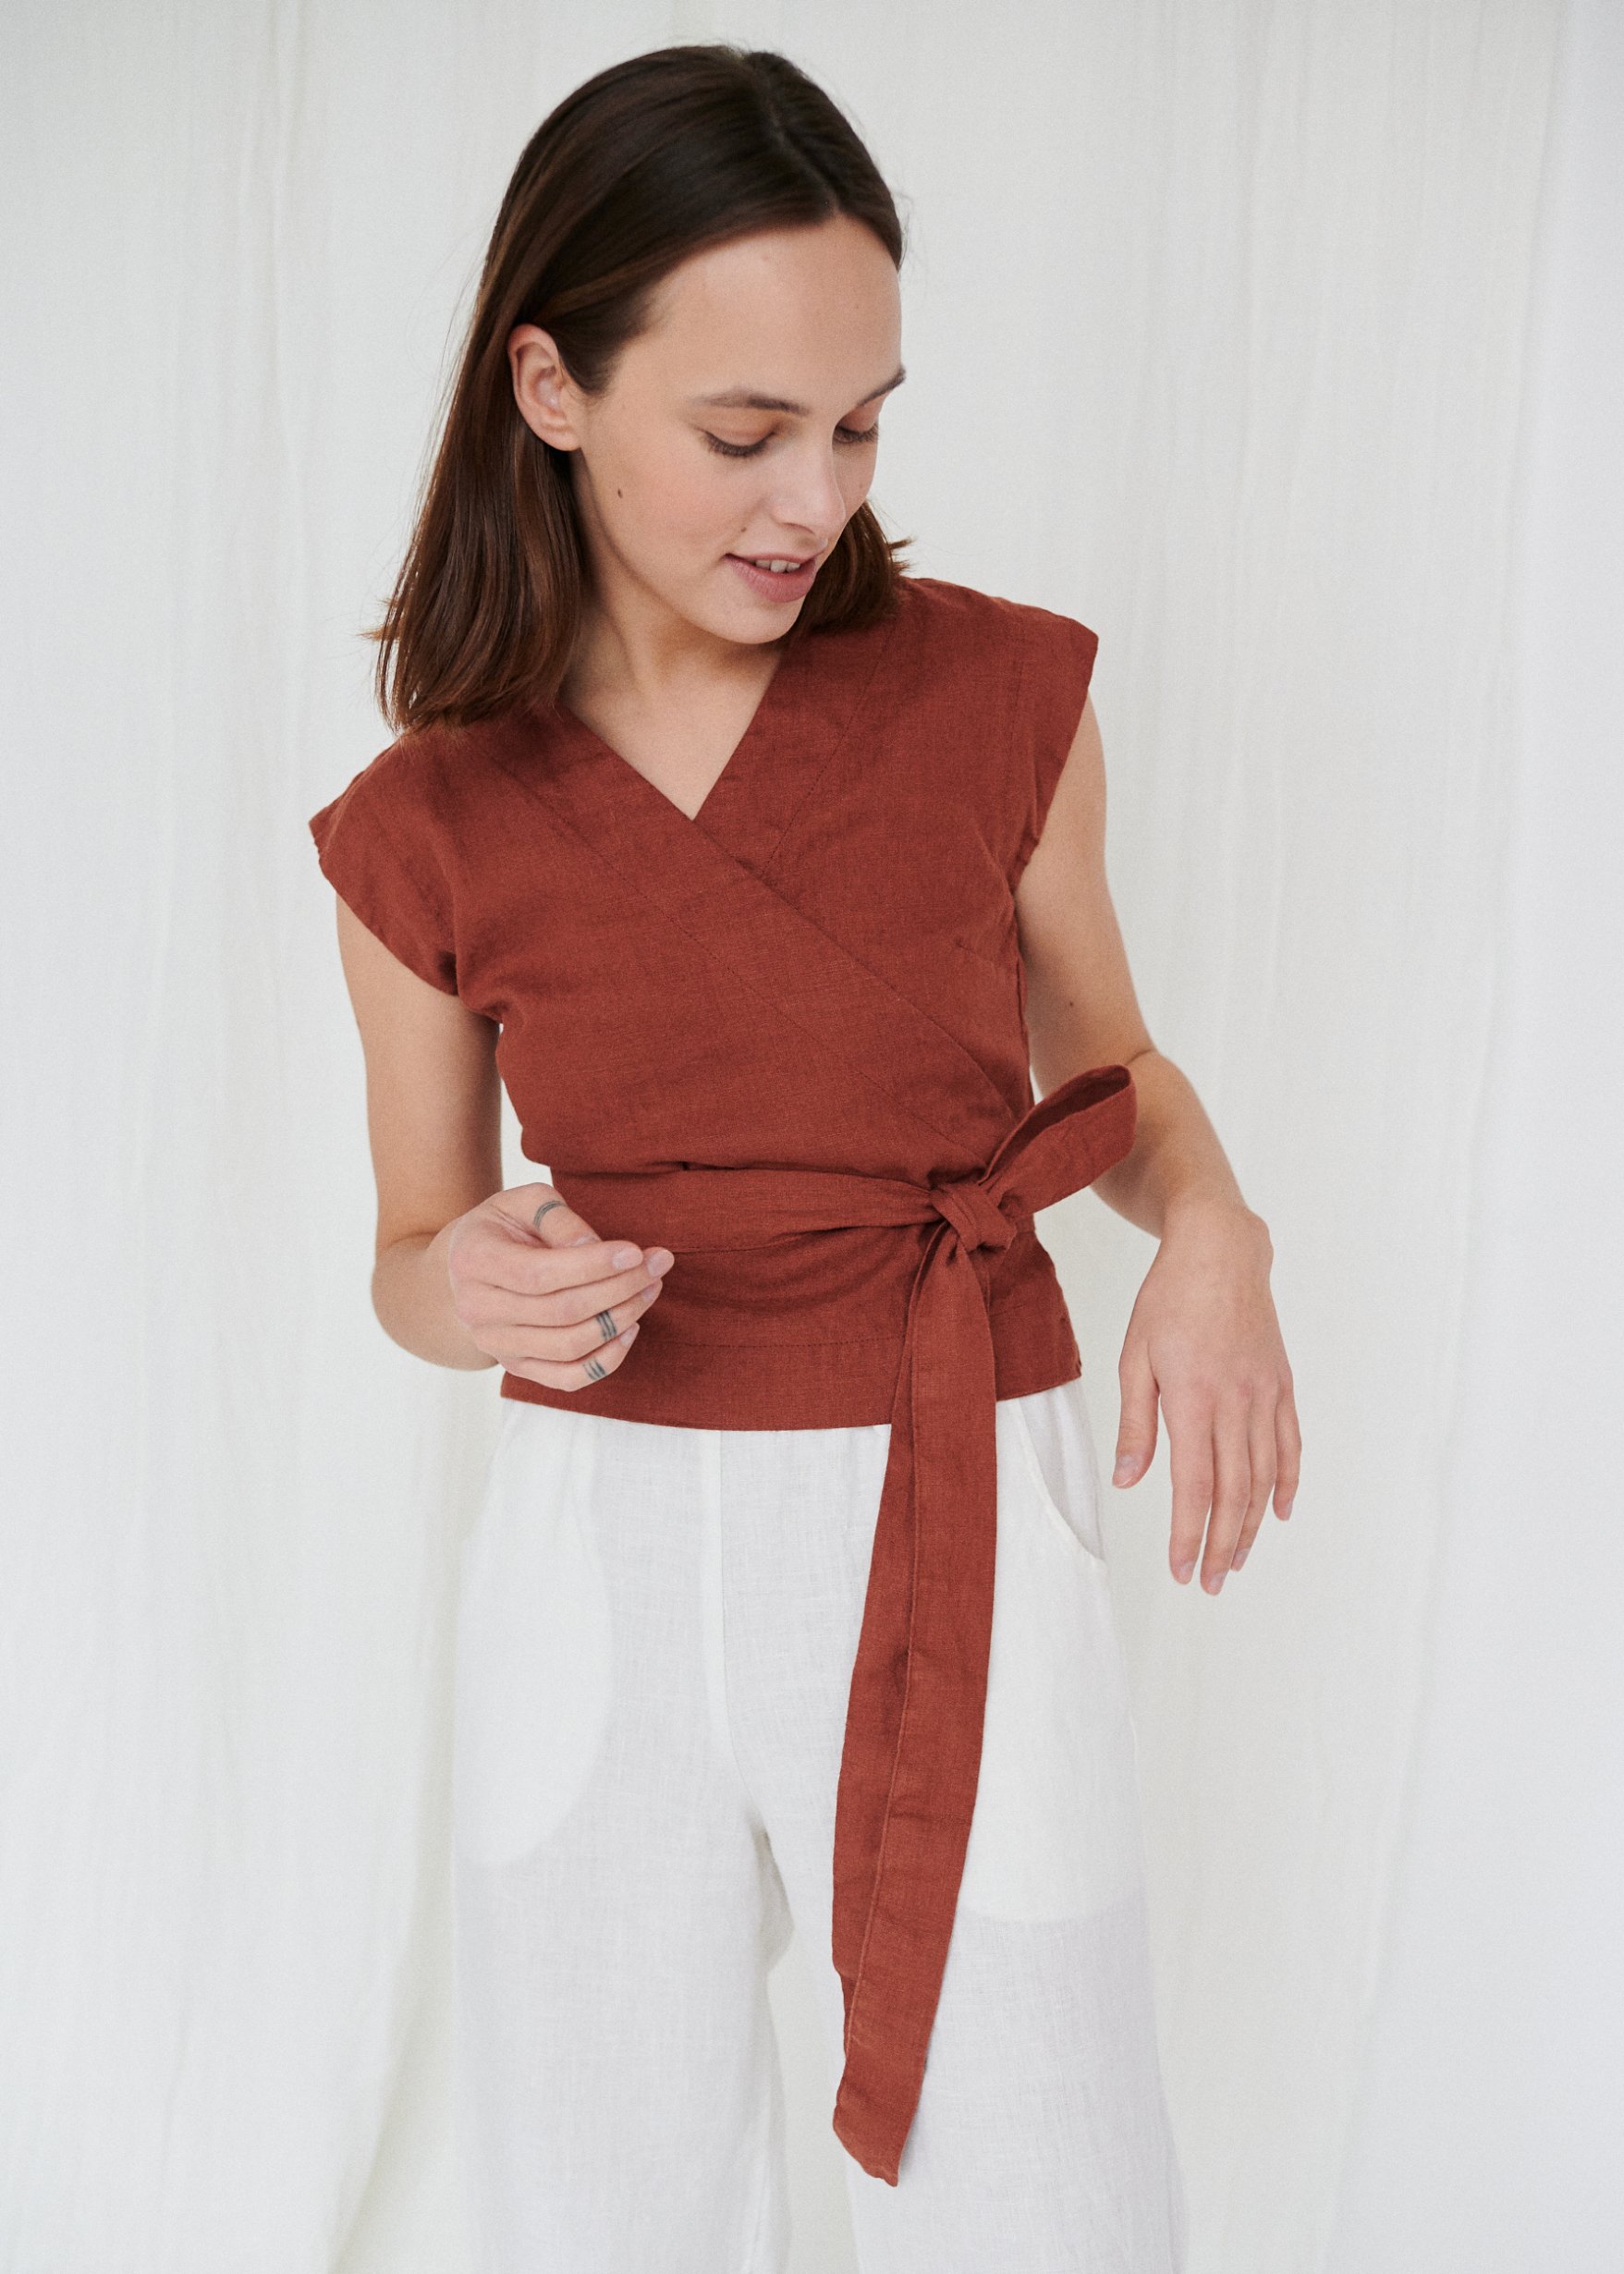 Slim fitting wrap top and linen pants combo